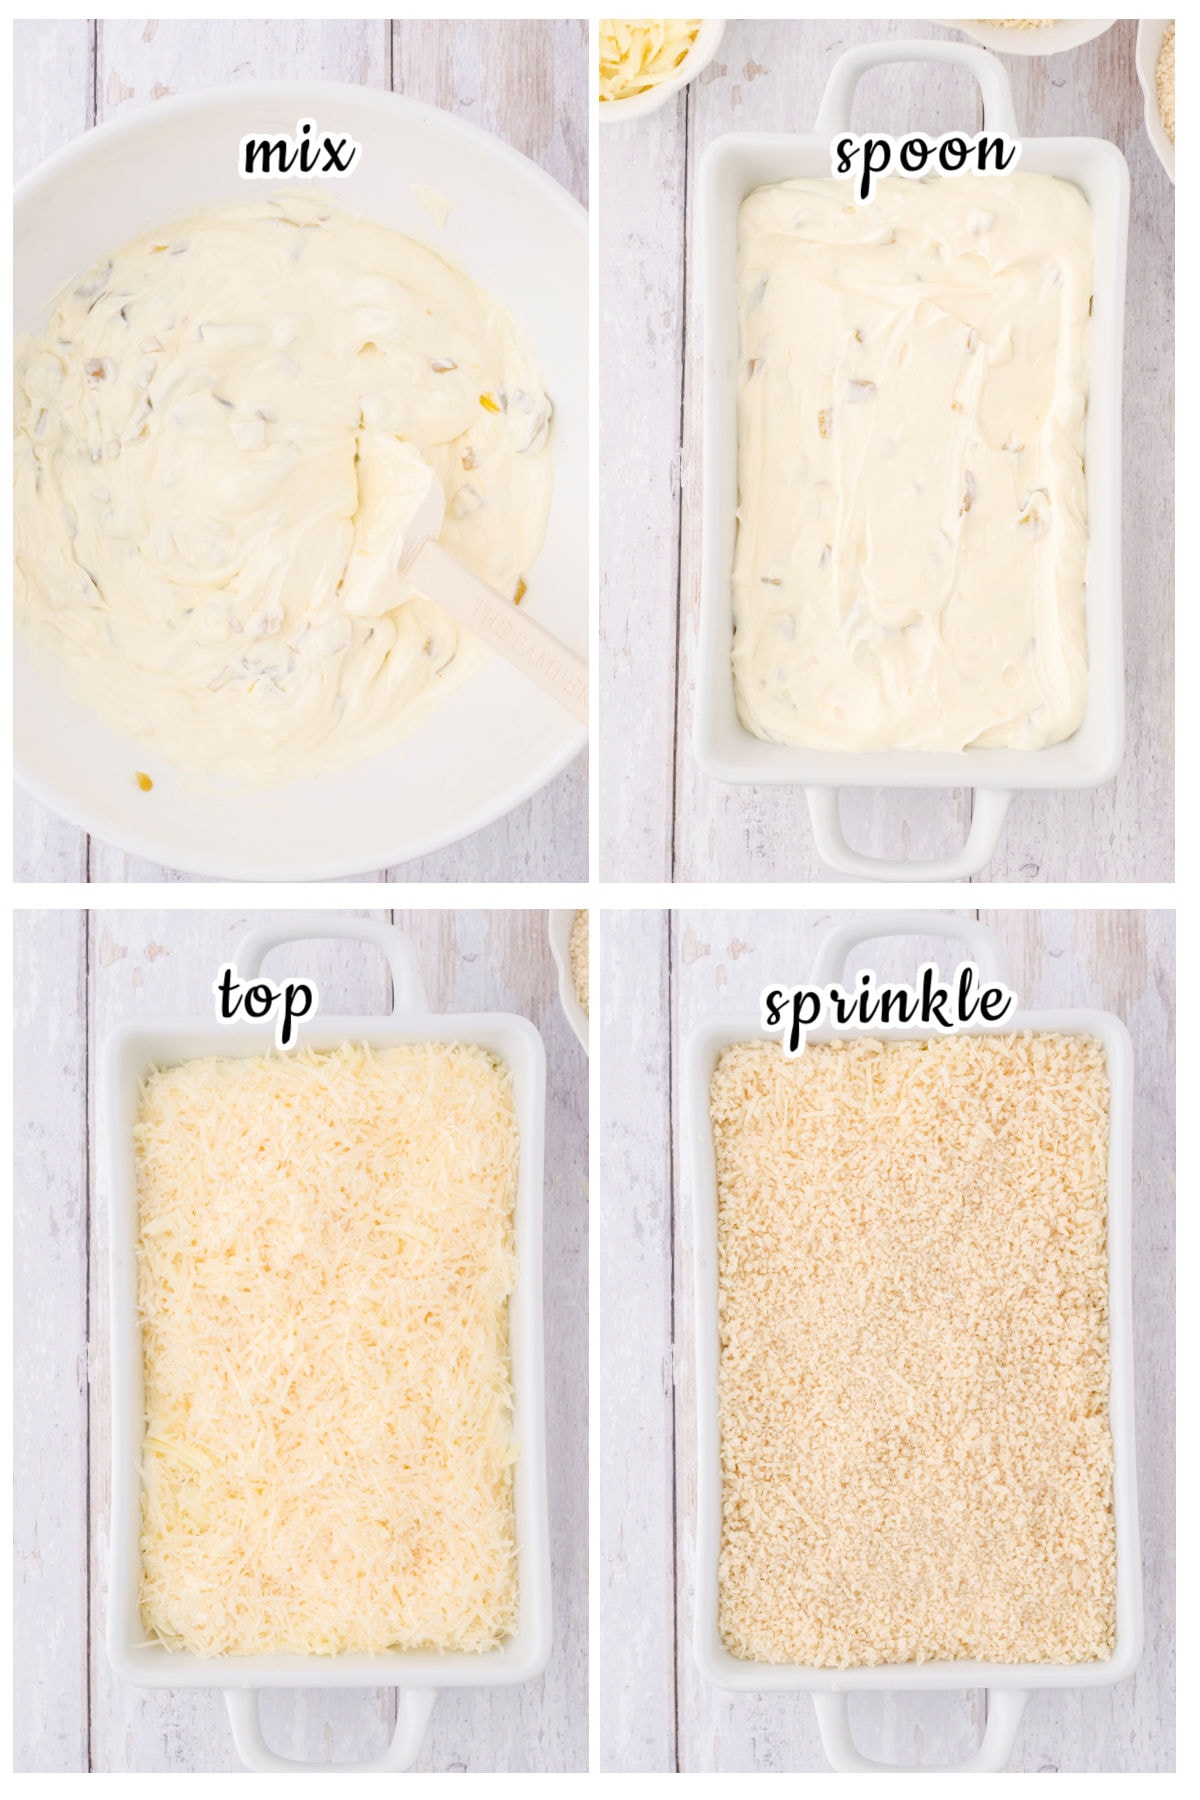 Step by step images showing how to make jalapeno popper dip.